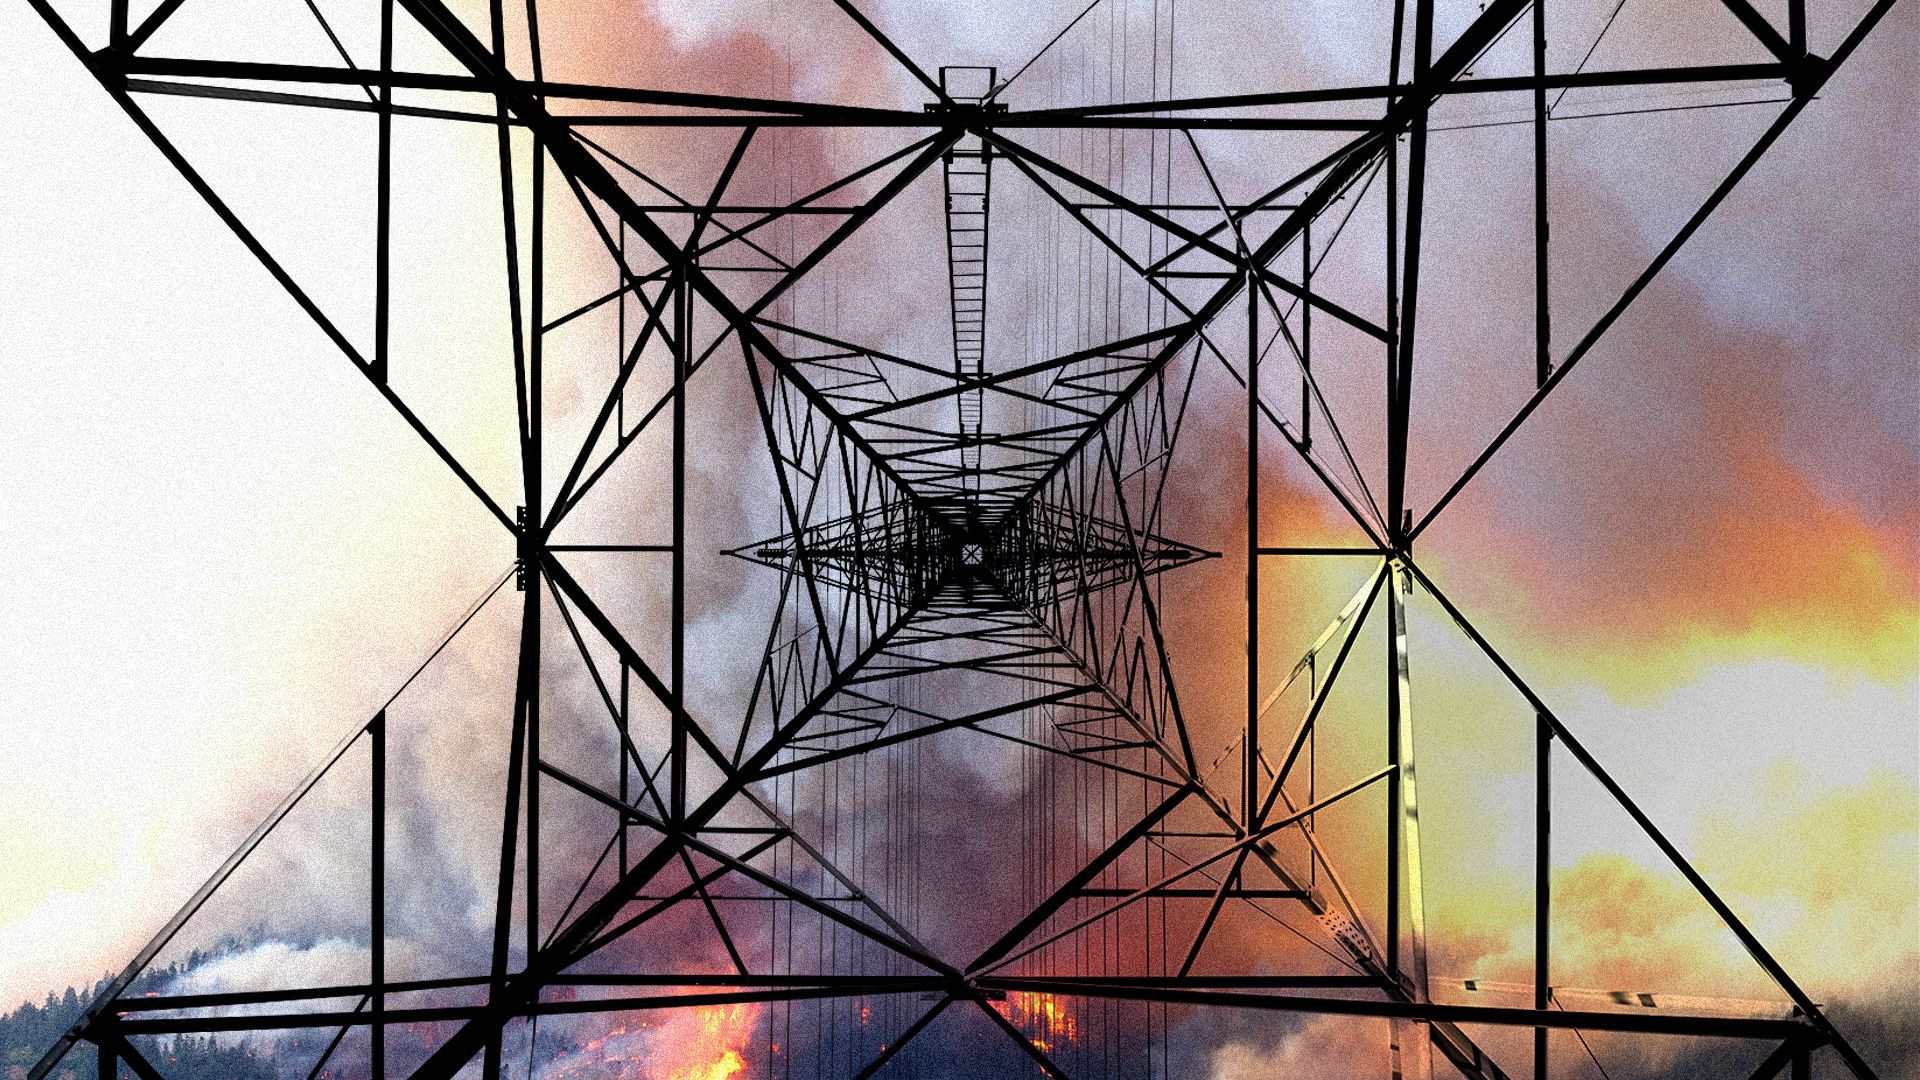 Collage illustration of an upward view of an electric tower with smoke and flames from a wildfire in the background